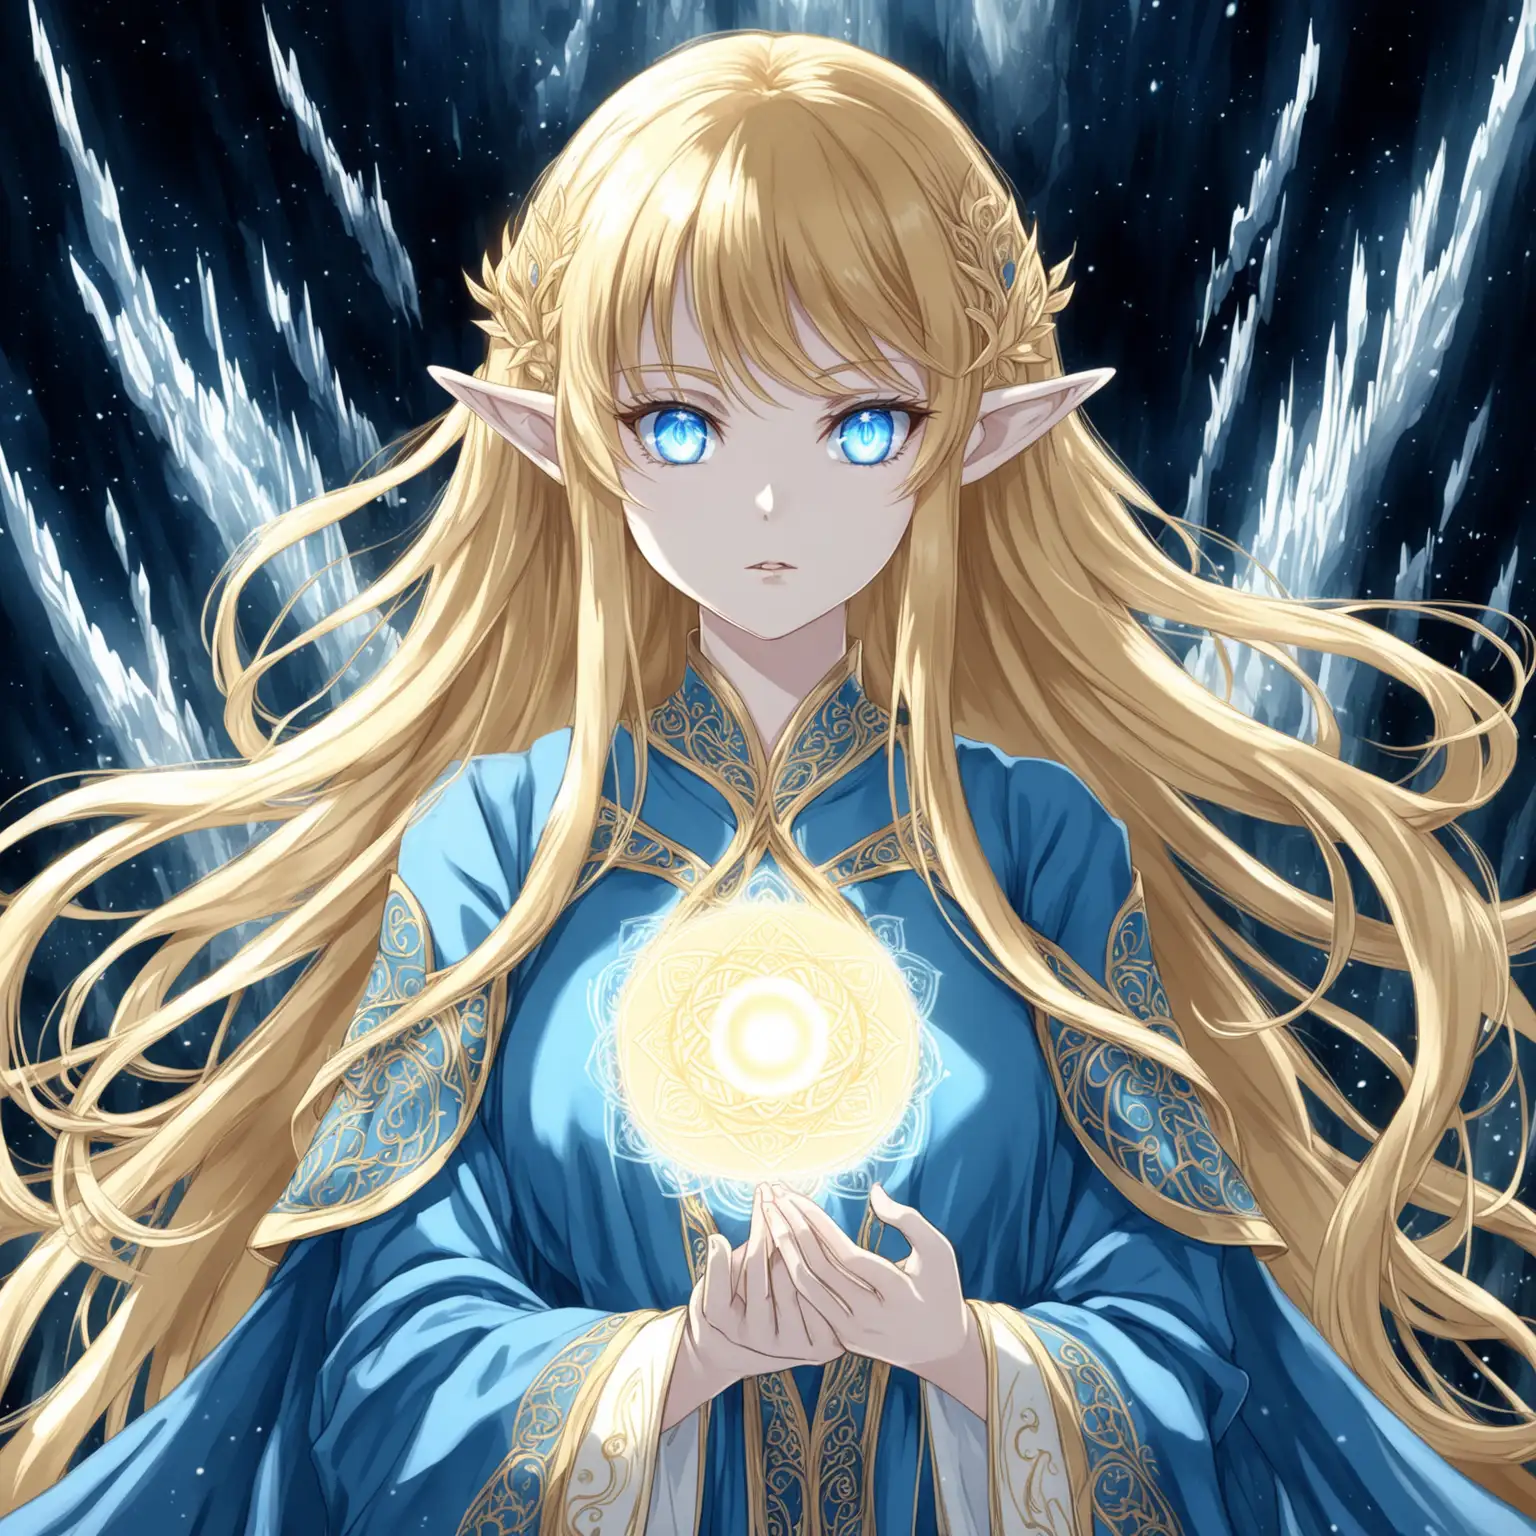 Mystical Anime Elf with Golden Hair and Blue Eyes in Elegant Robes